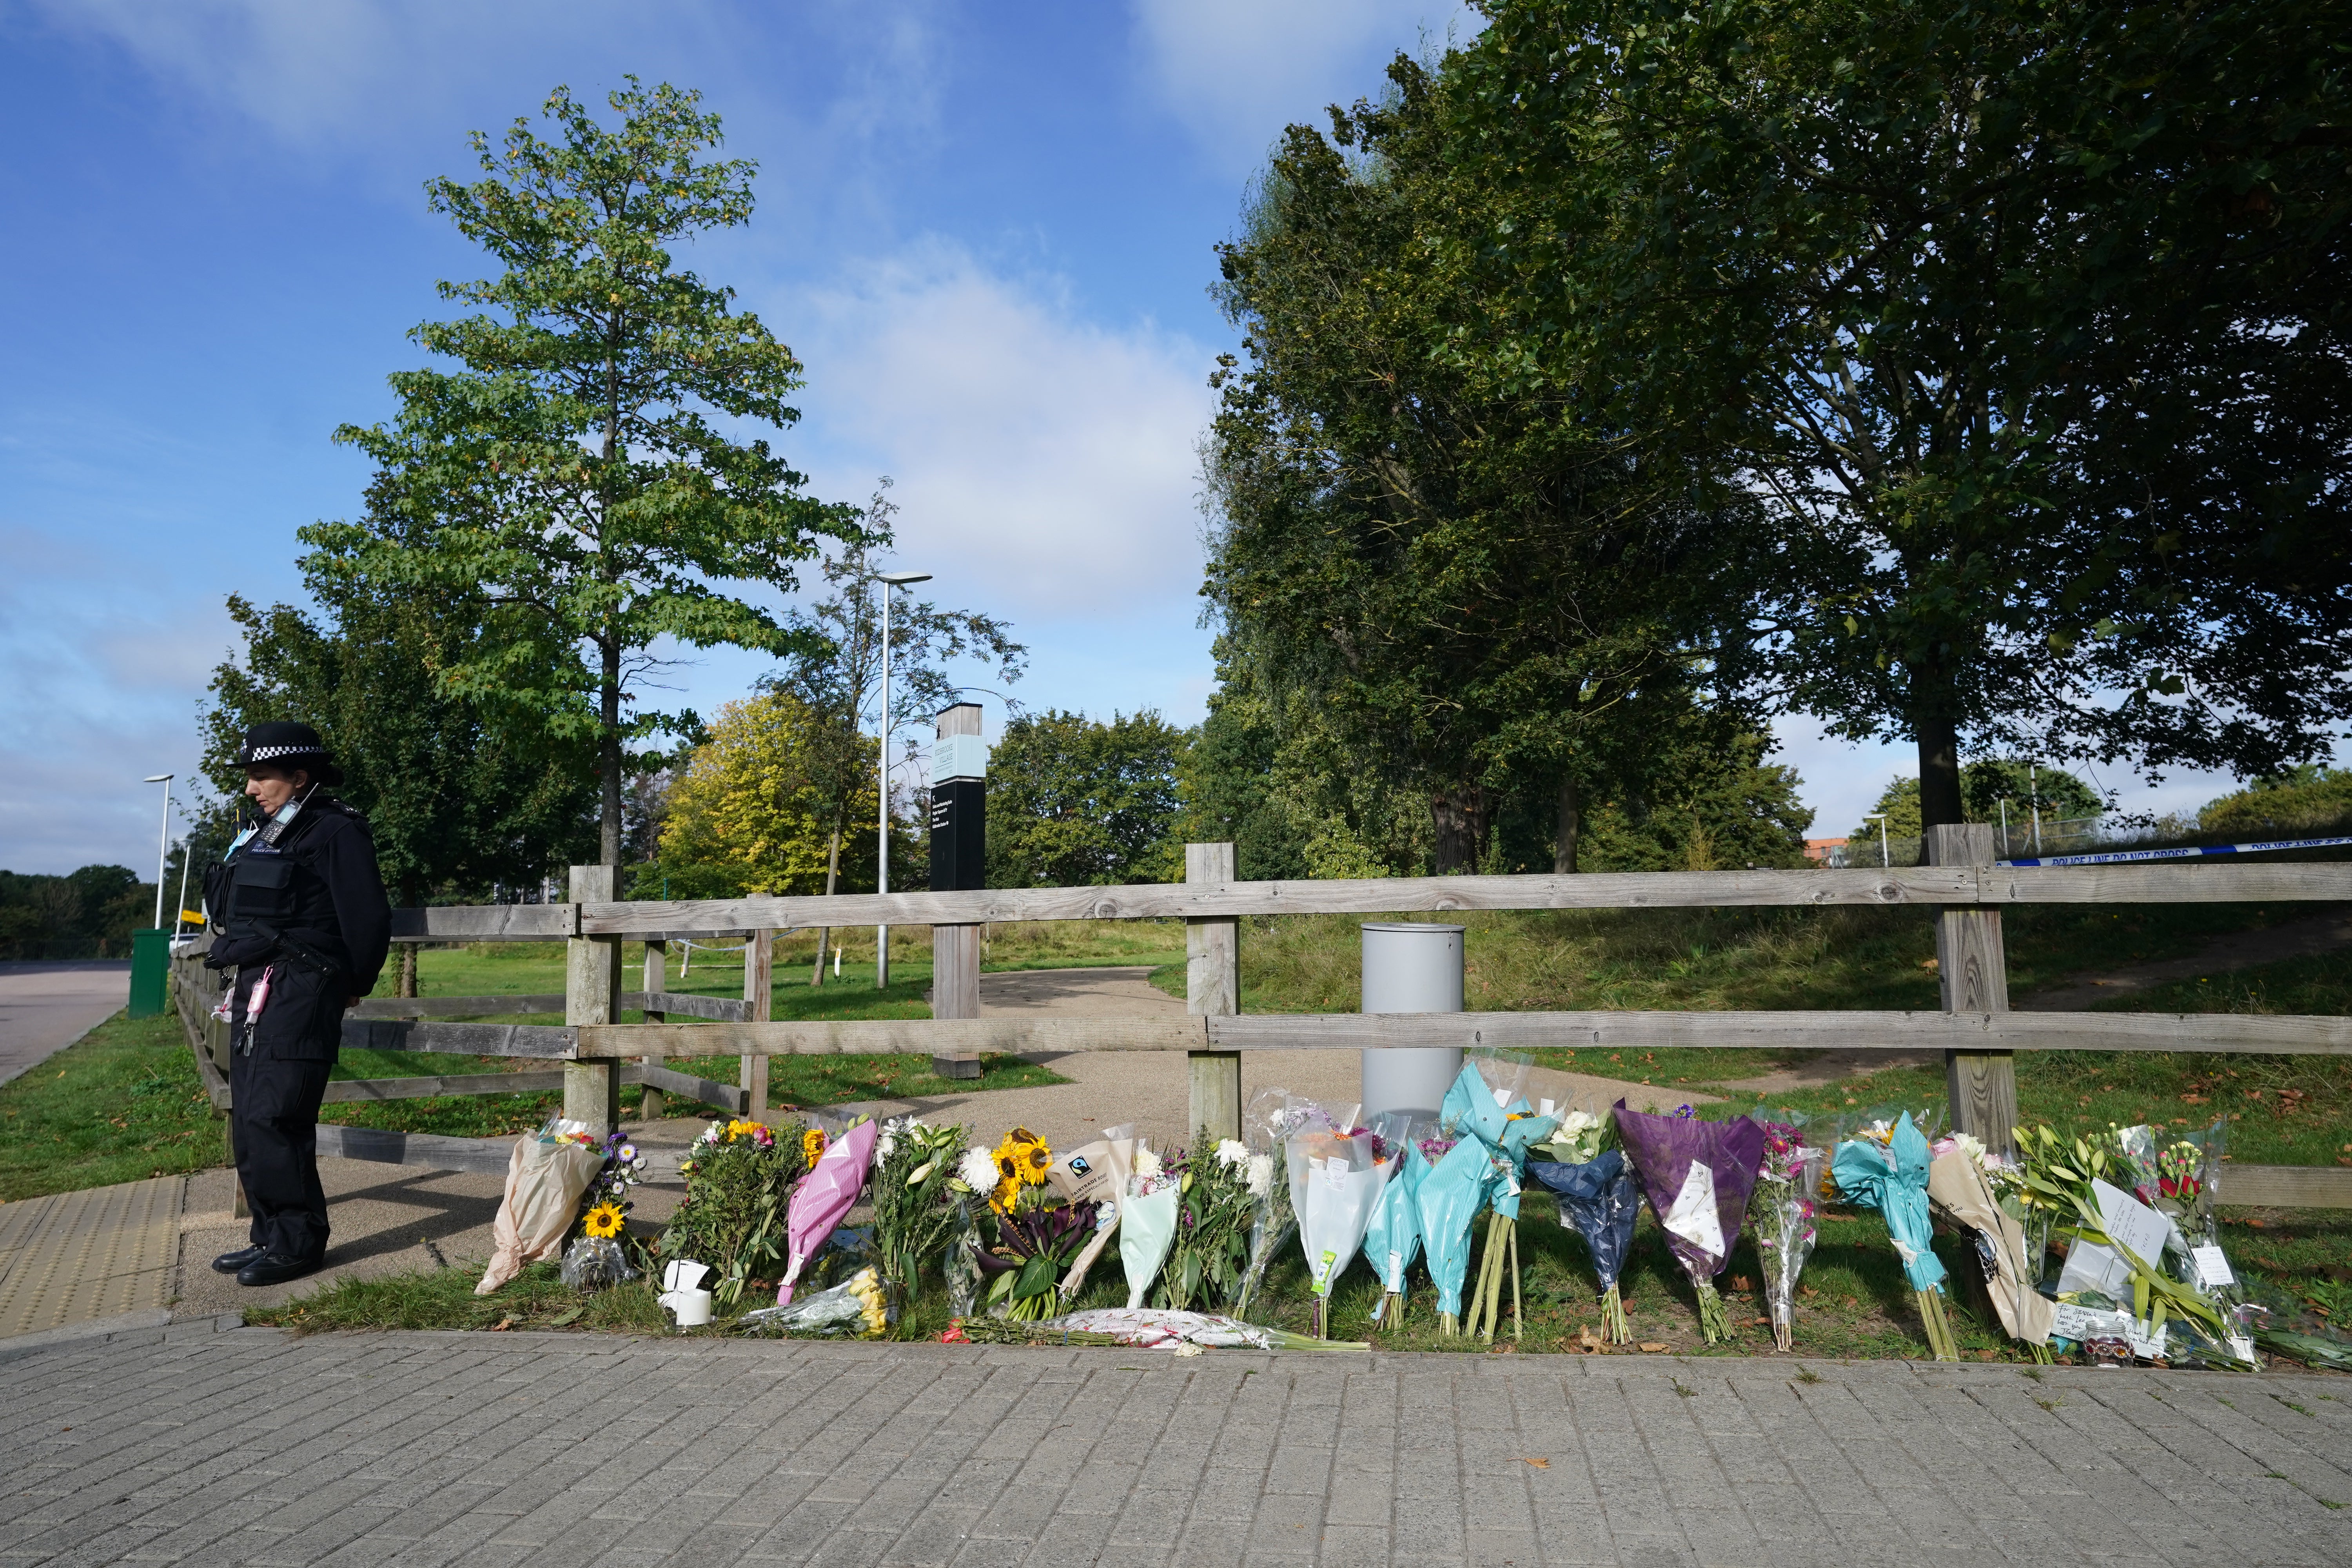 Floral tributes left at Cator Park, Kidbrooke, south-east London, close to where Sabina Nessa’s body was found (Ian West/PA)